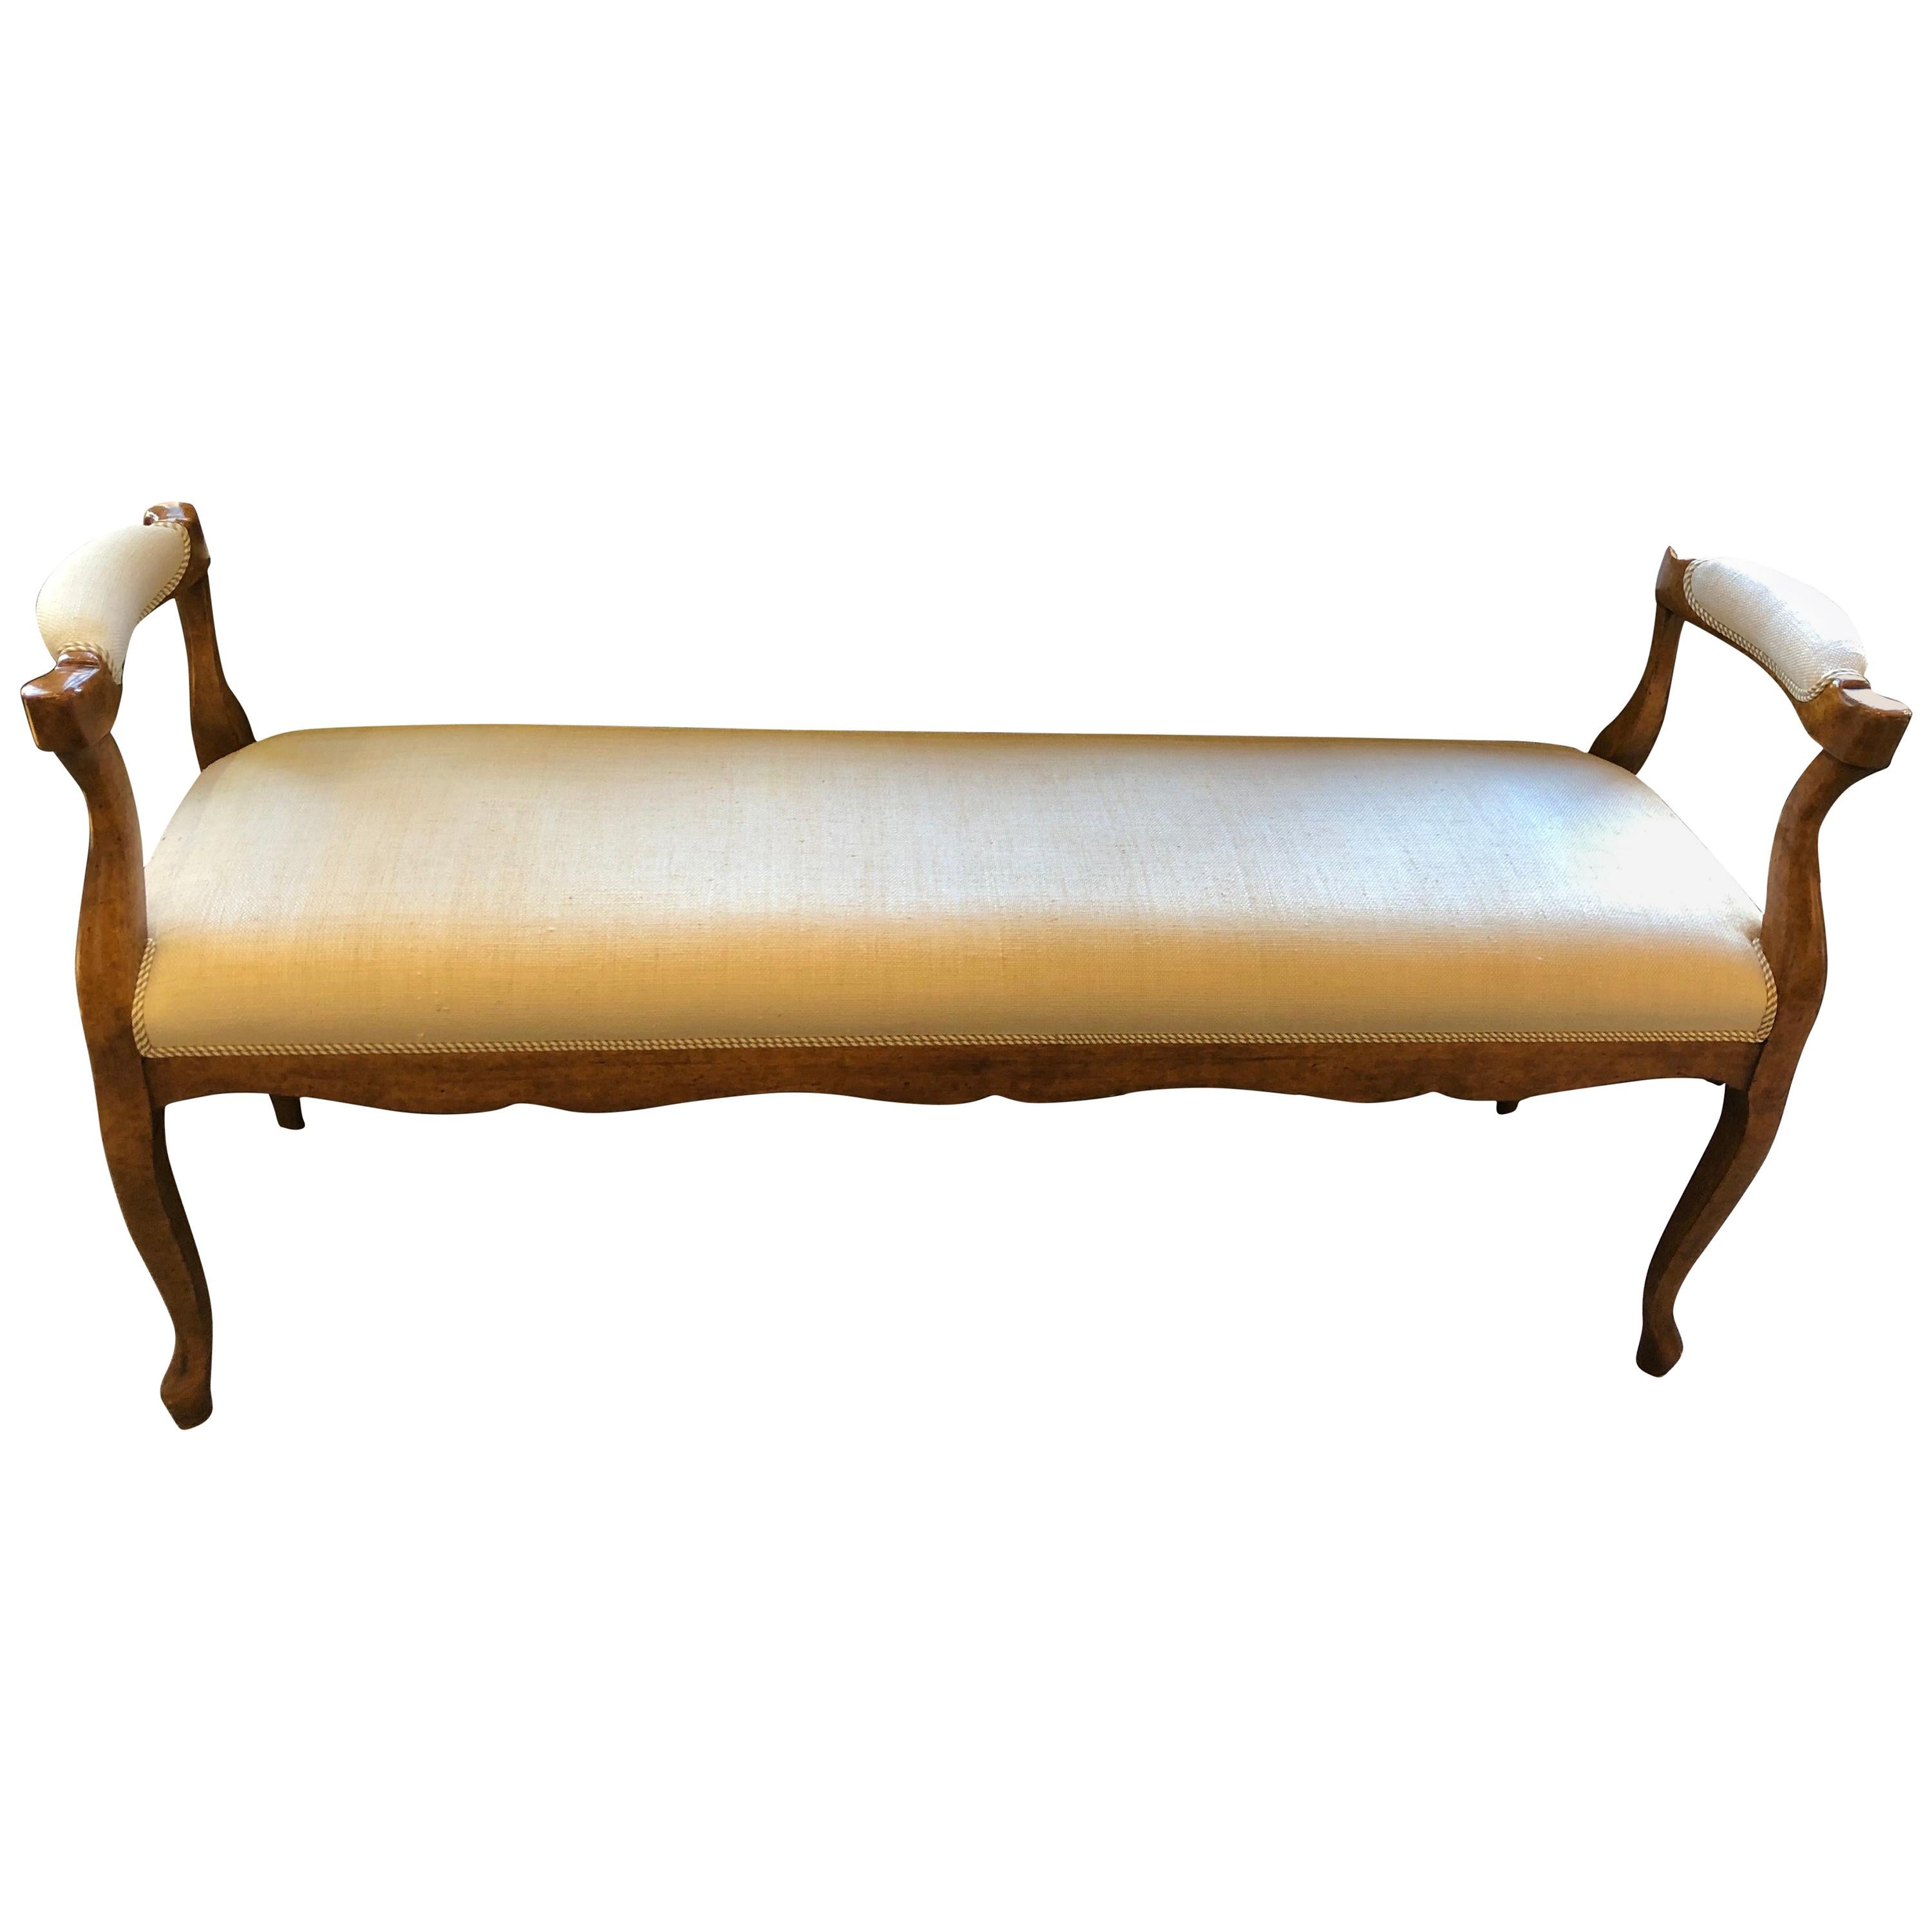 Mid-20th Century French Style Bench